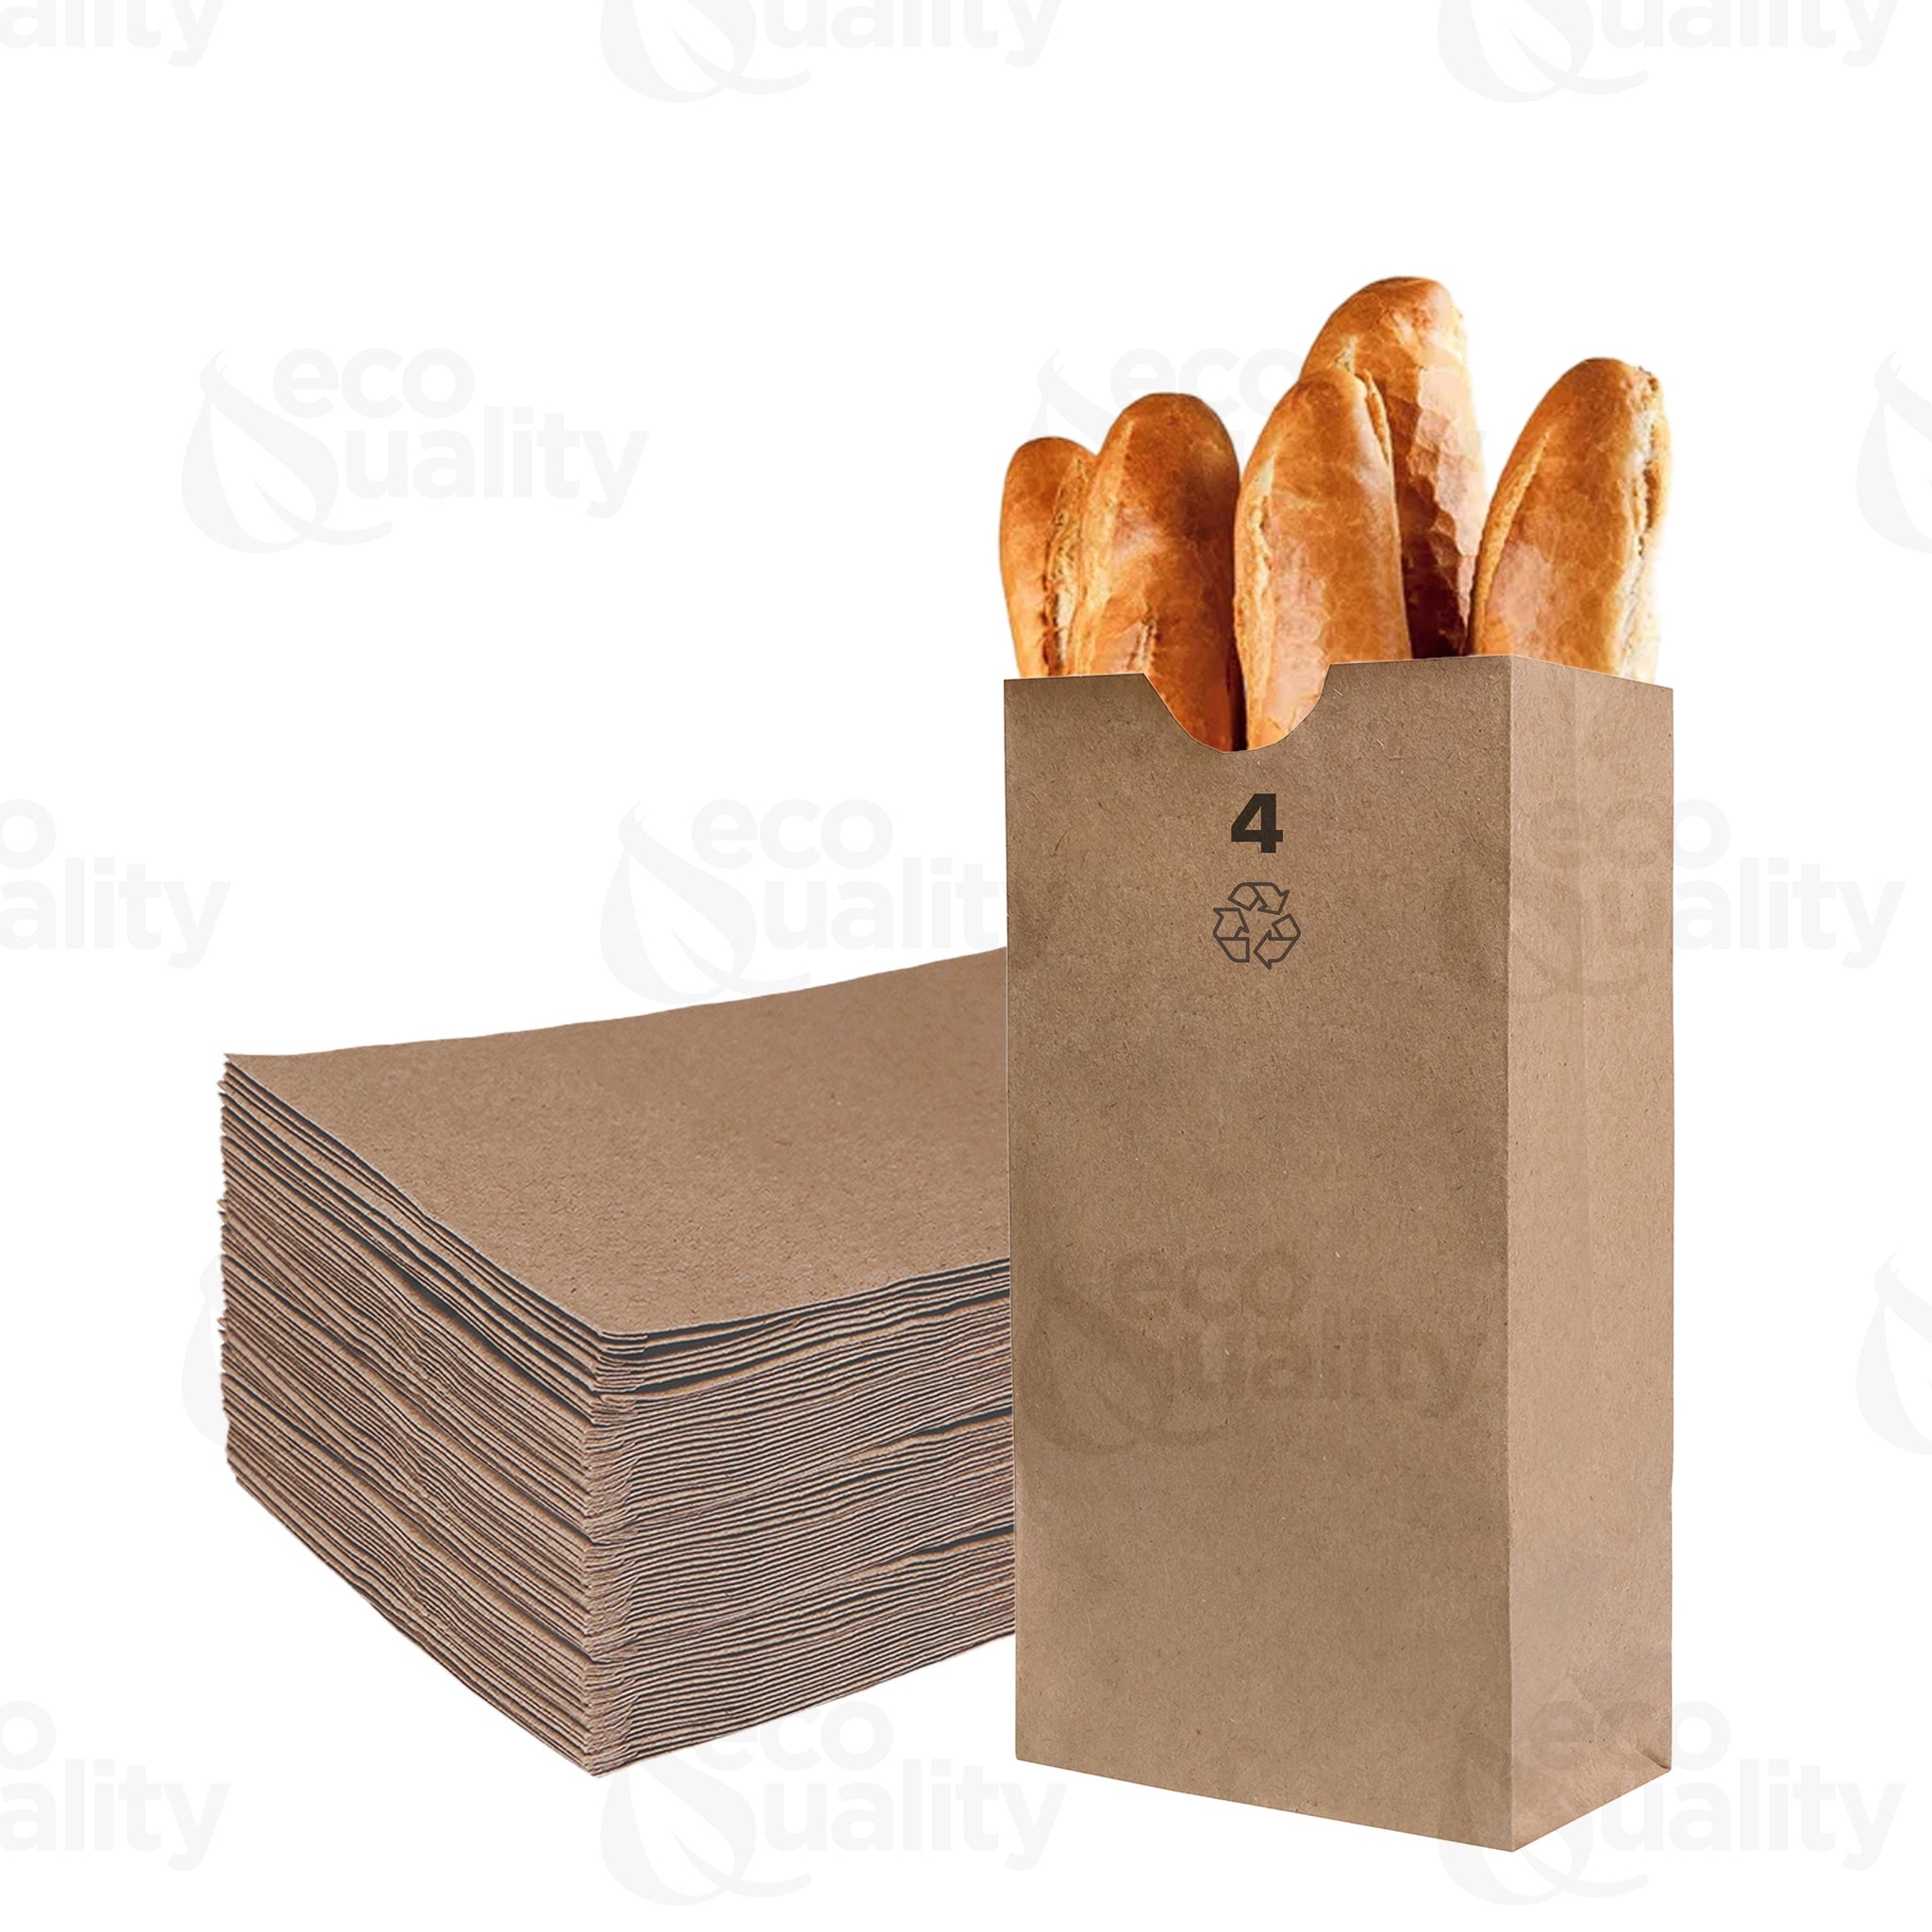 4 pound disposable bag brown Paper Bags Shopping Bags foldable catering bags brown kraft paper bag 4 pound candy bag snack bag gift bags DIY Bags arts and craft Sandwich Bag party favor bag lunch bag togo bag takeout bag Restaurant supplies paper bags Kraft Paper Bags kraft grocery bags Household Supplies